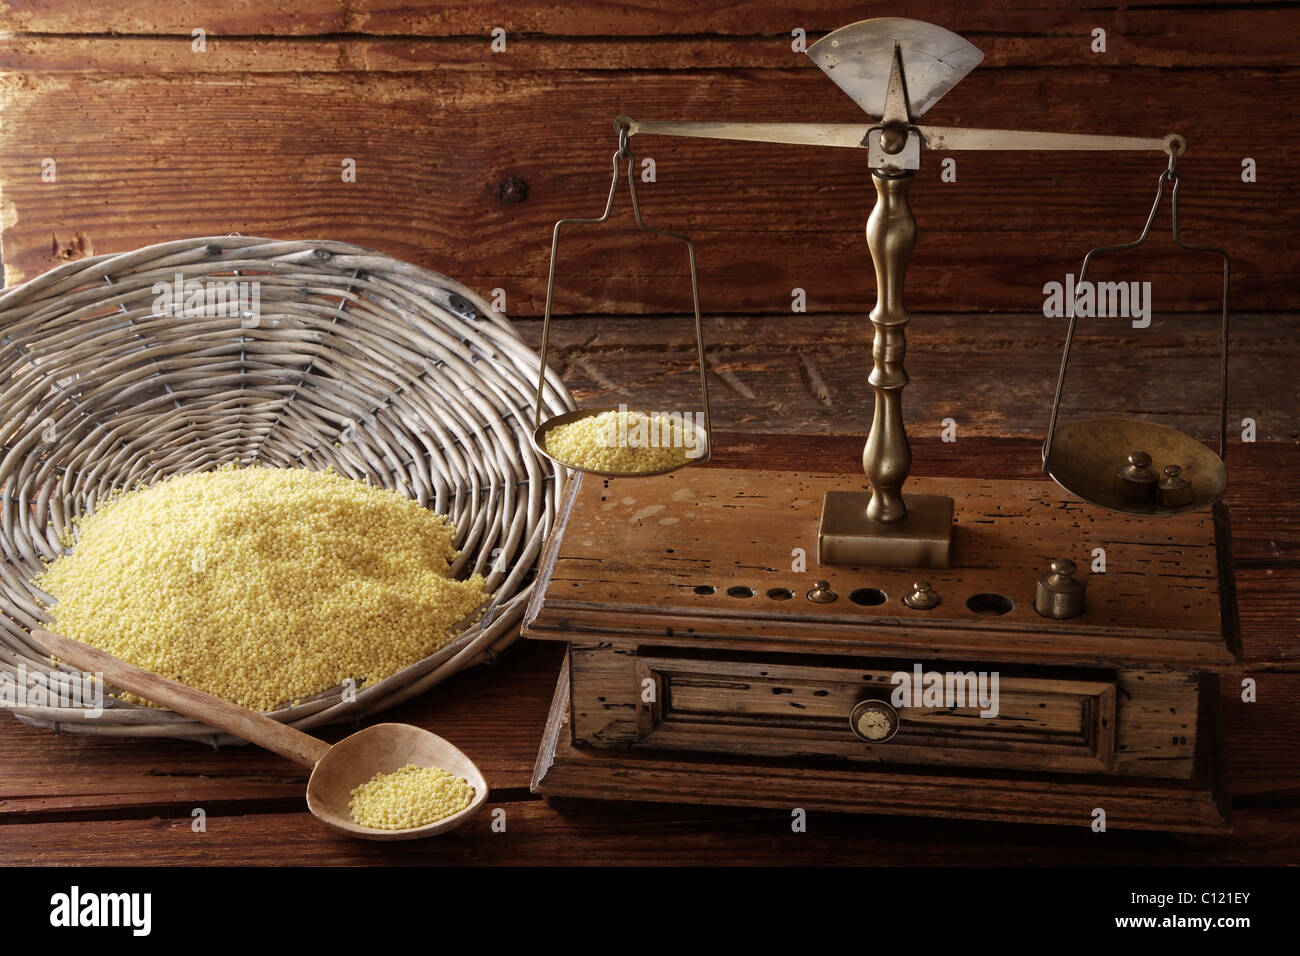 Antique scales weighing grains of Millet (Panicum miliaceum) on a wooden surface Stock Photo